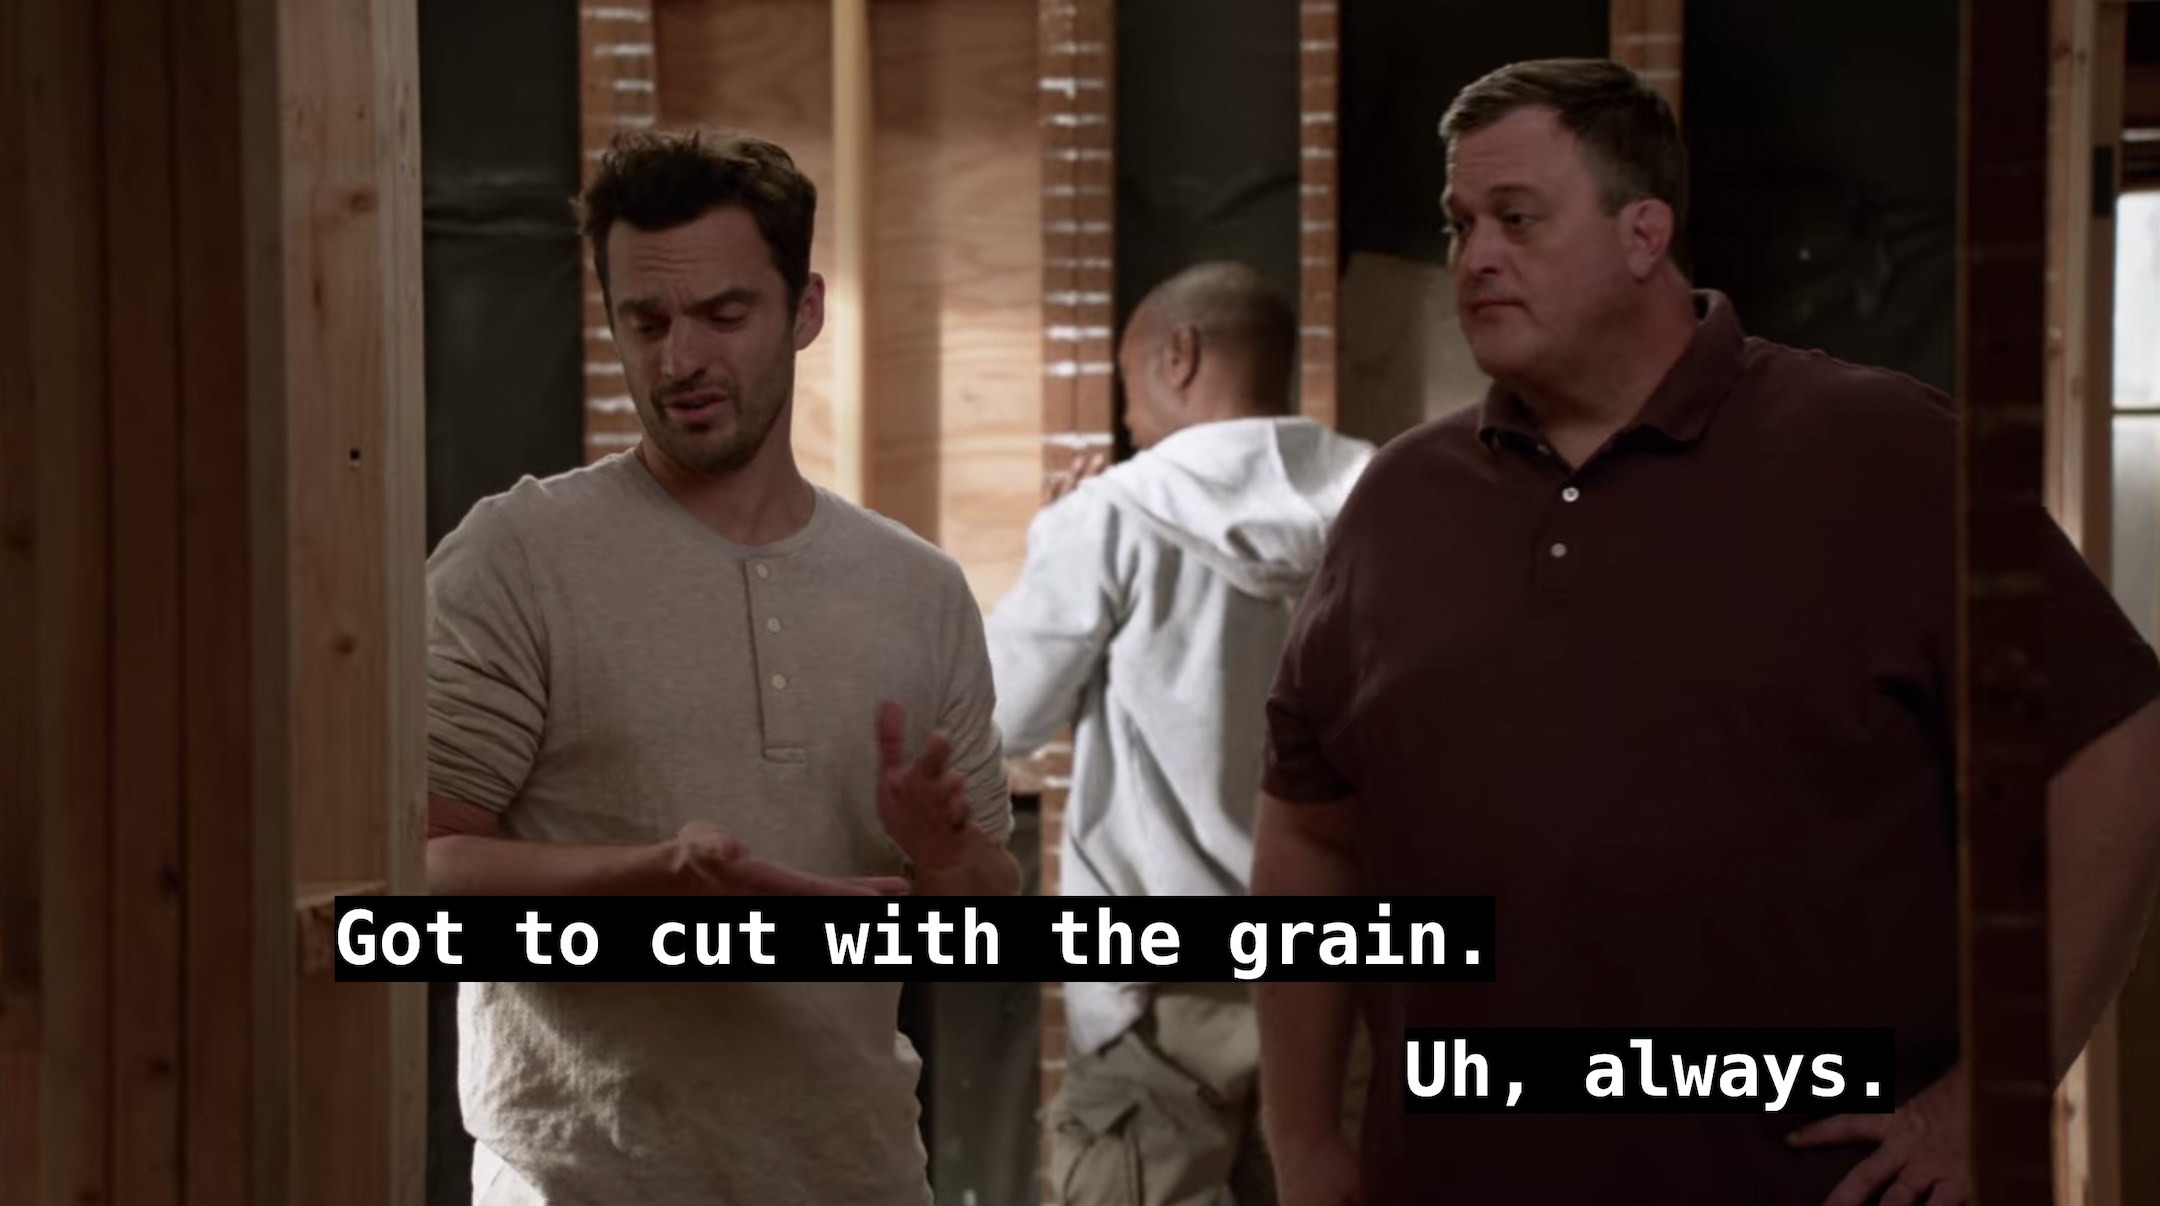 Nick says, Got to cut with the grain, Jason says, Uh, always